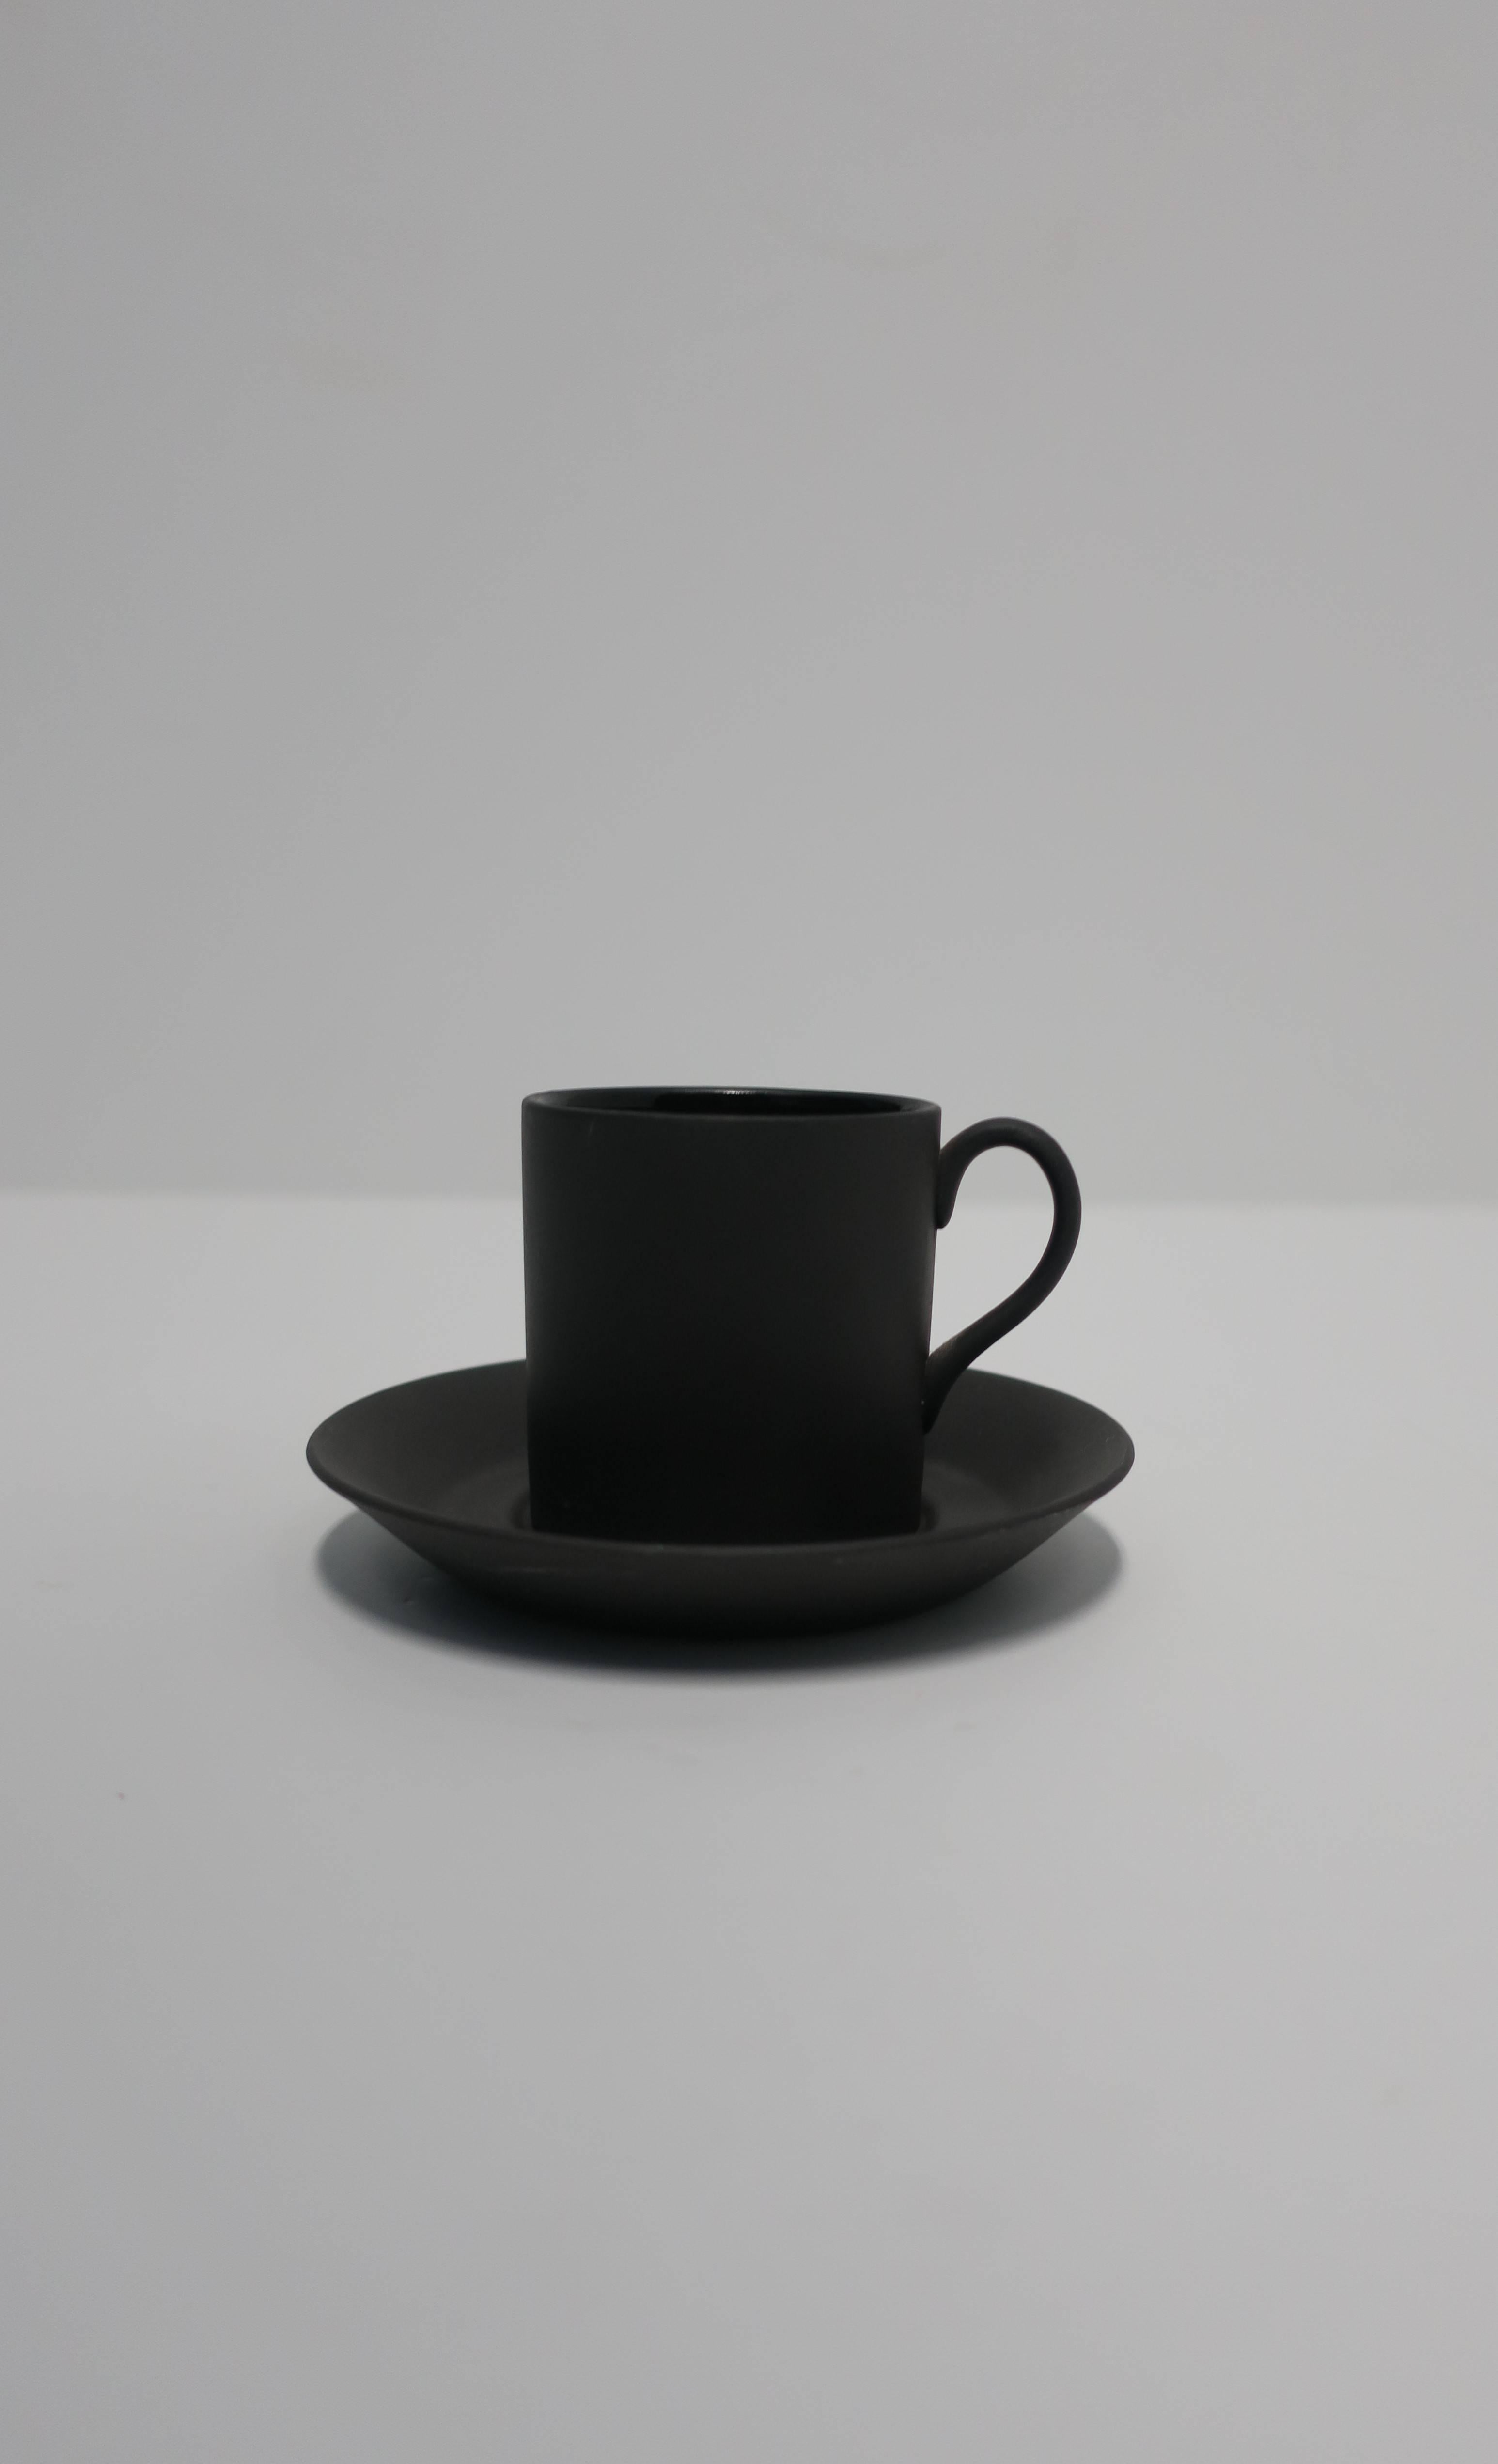 A beautiful matte basalt black espresso or demitasse cup and saucer, by Wedgwood, England. With maker's mark on bottom as show in images. Interior of cup is glazed smooth. Made in England.